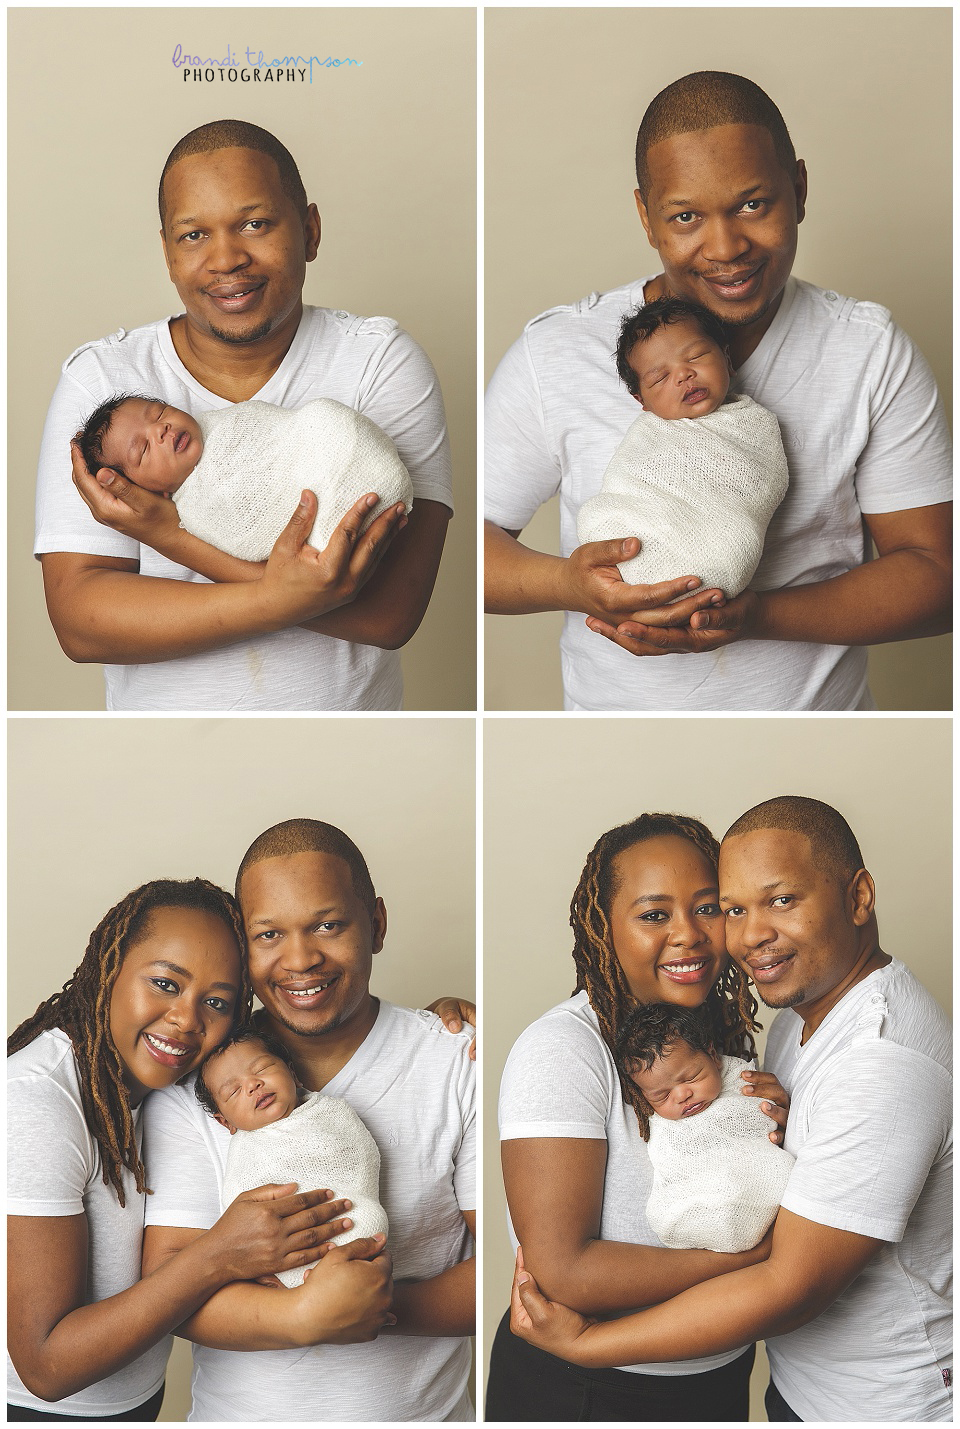 family portraits in studio with mom, dad and newborn baby boy